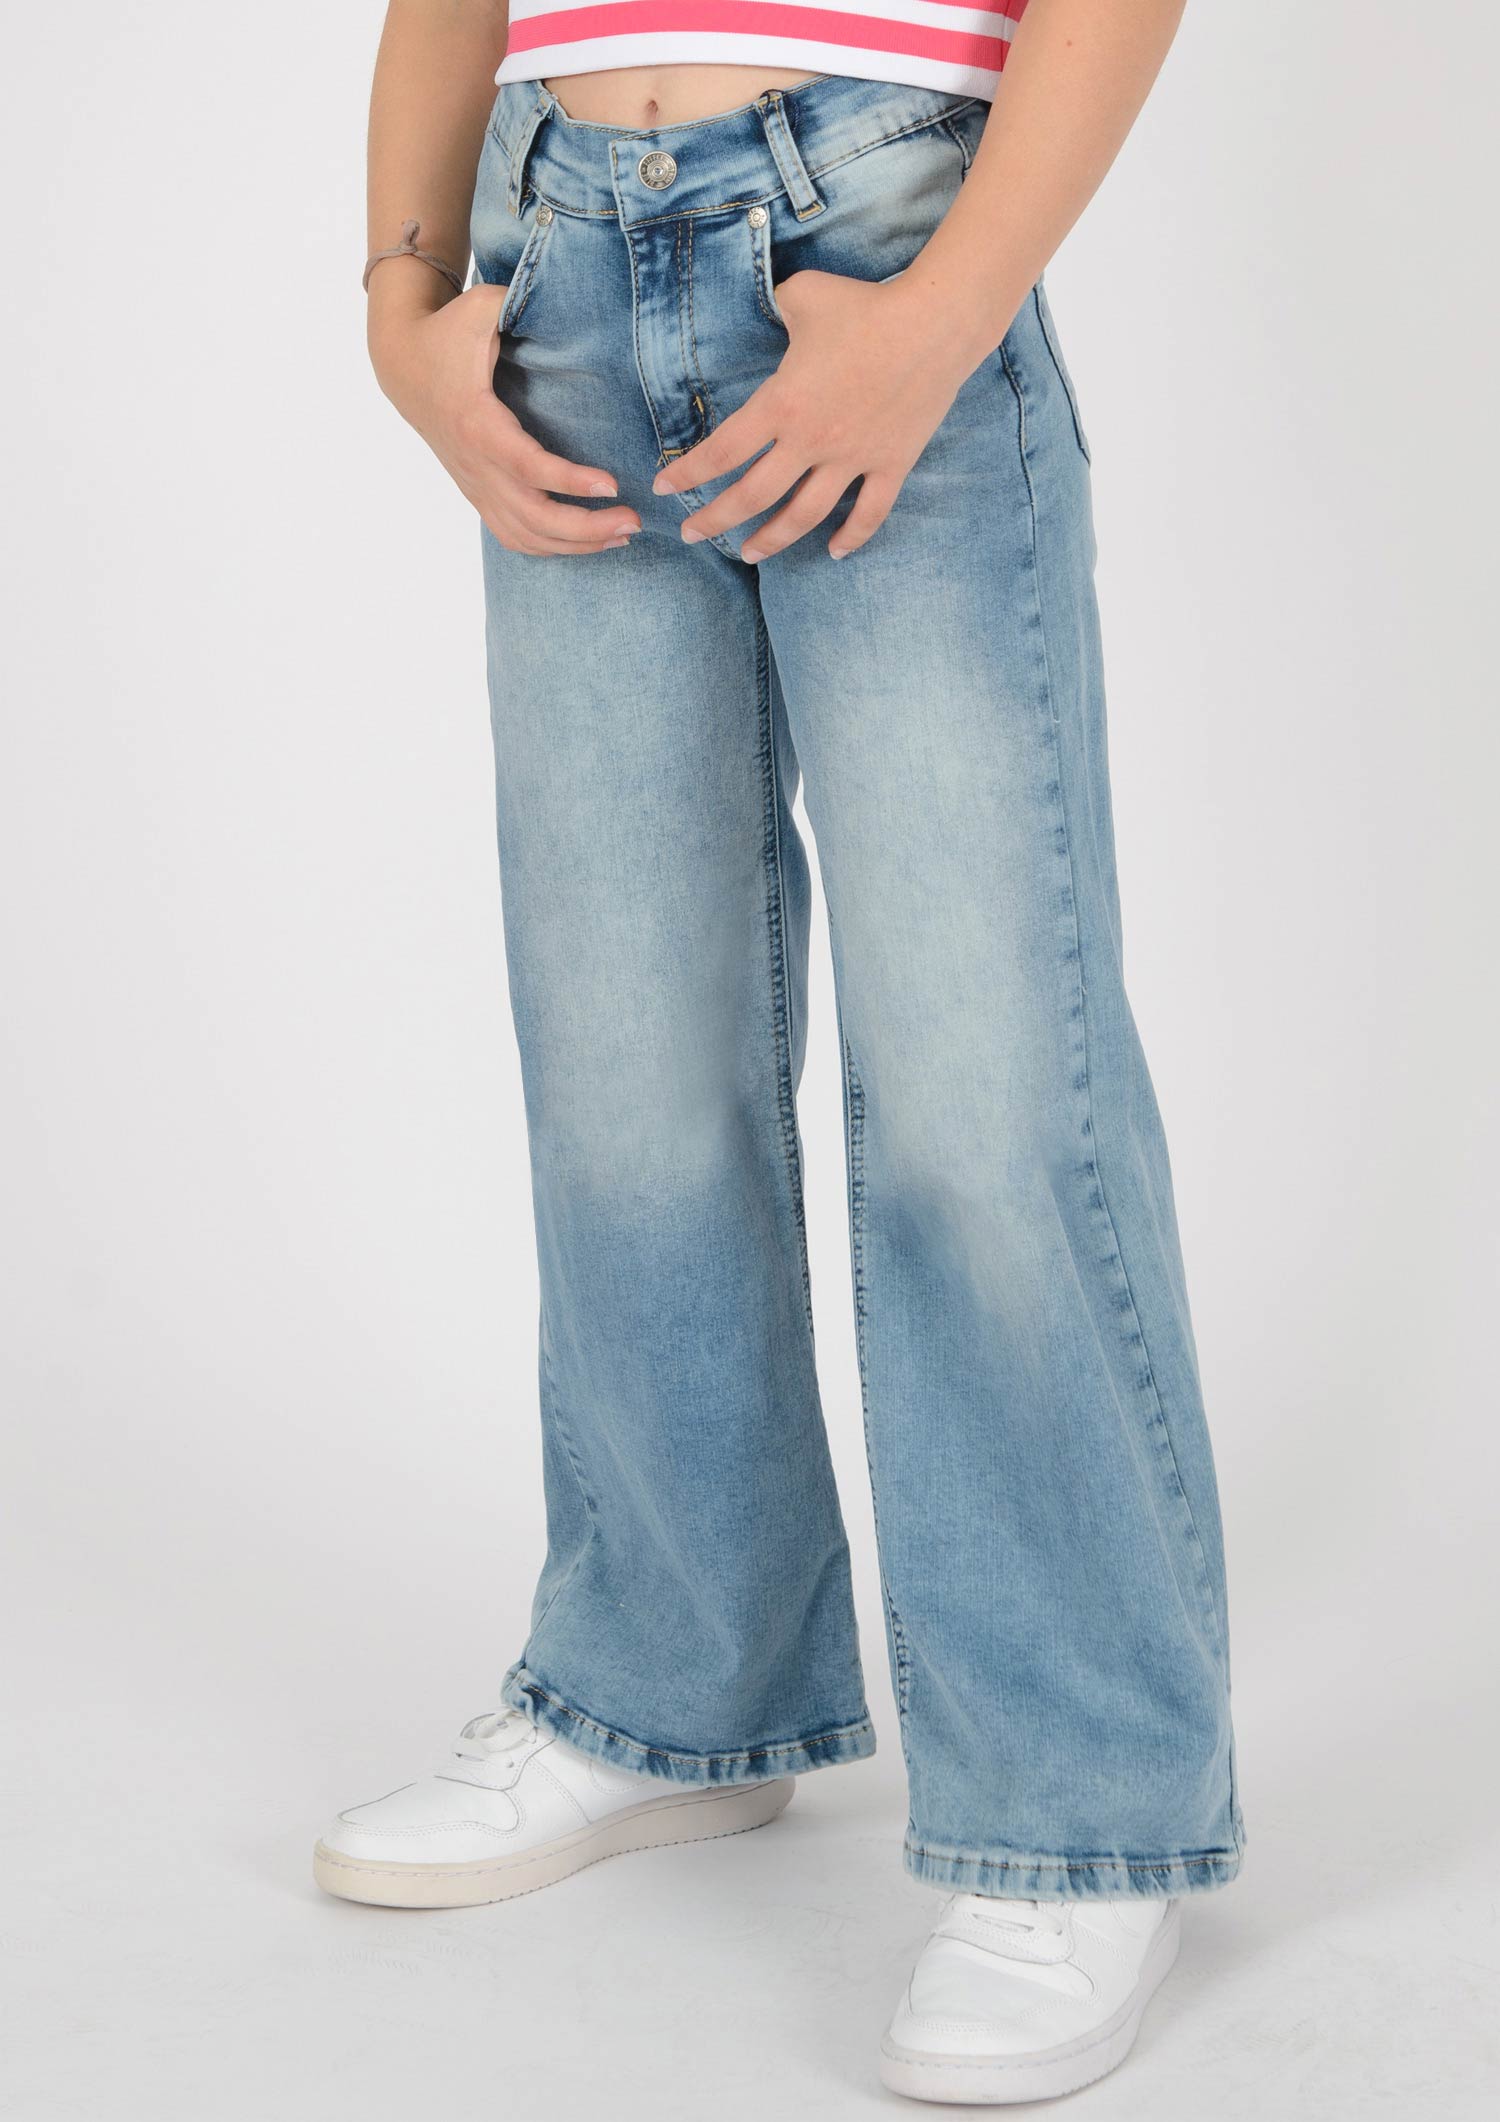 1331-Girls Wide Leg Jeans avaible in Slim, Normal